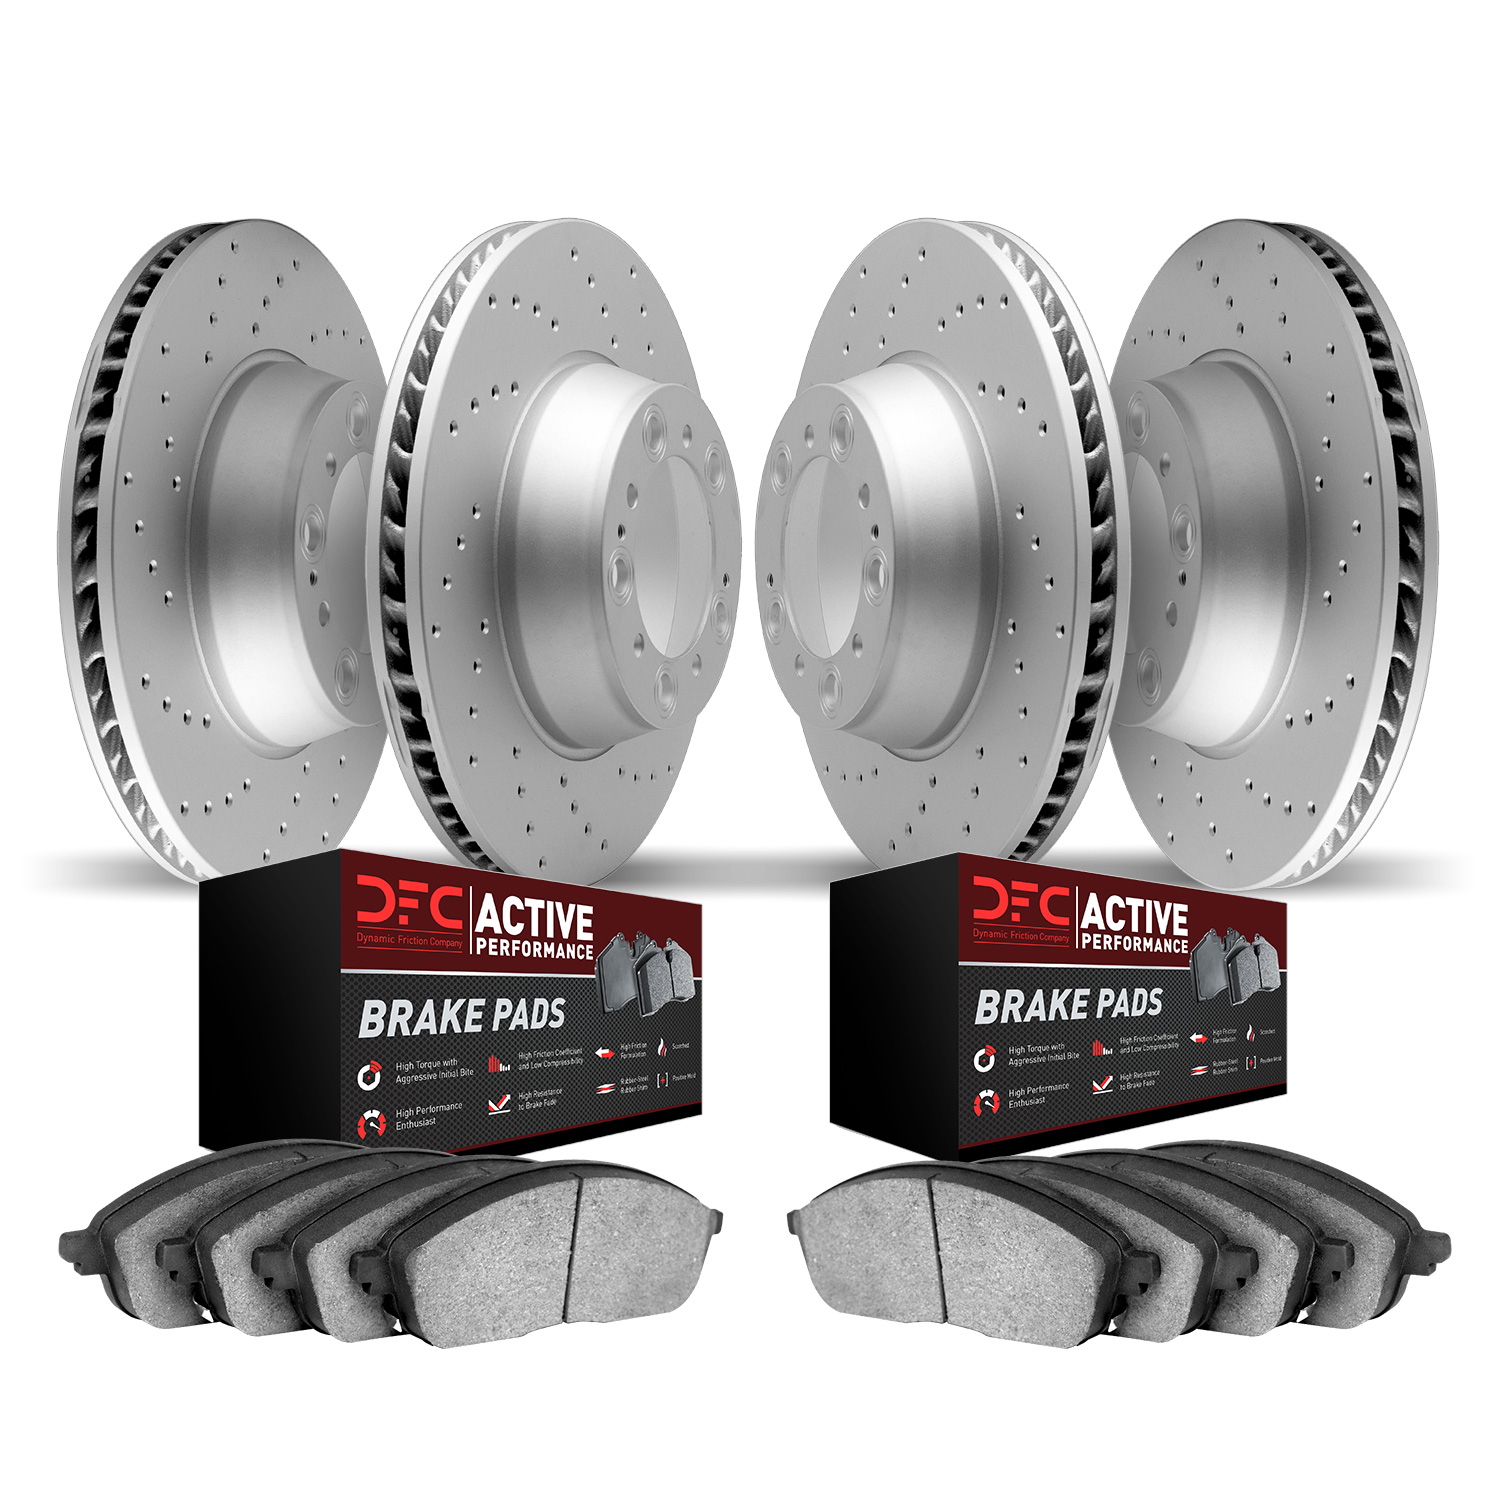 2704-46028 Geoperformance Drilled Brake Rotors with Active Performance Pads Kit, 2016-2016 GM, Position: Front and Rear